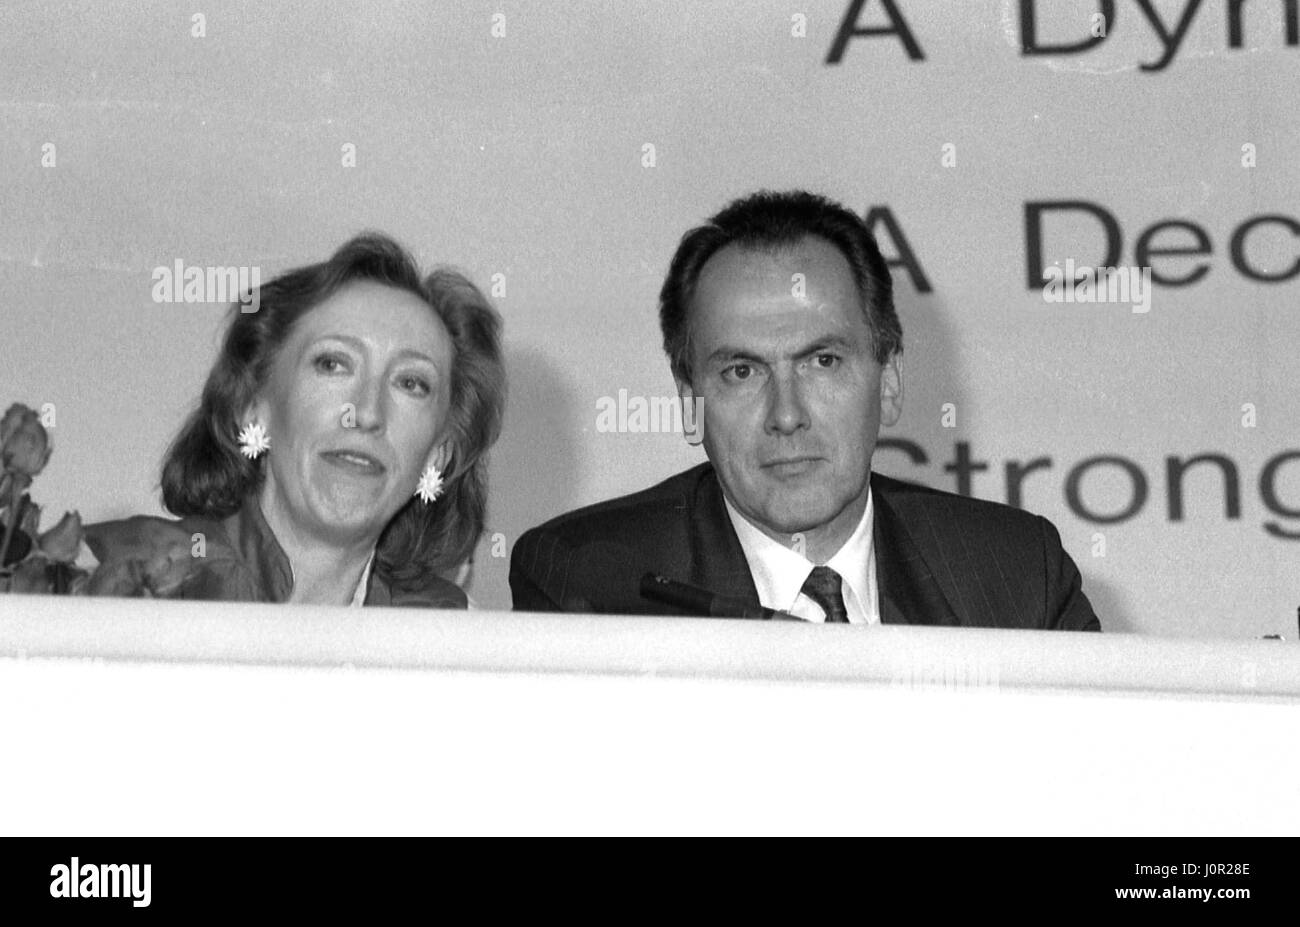 Margaret Beckett (left), Shadow Chief Secretary to the Treasury and Dr. Jack Cunningham, Shadow Leader of the House of Commons, attend a Labour party policy launch press conference in London, England on May 24, 1990. Stock Photo